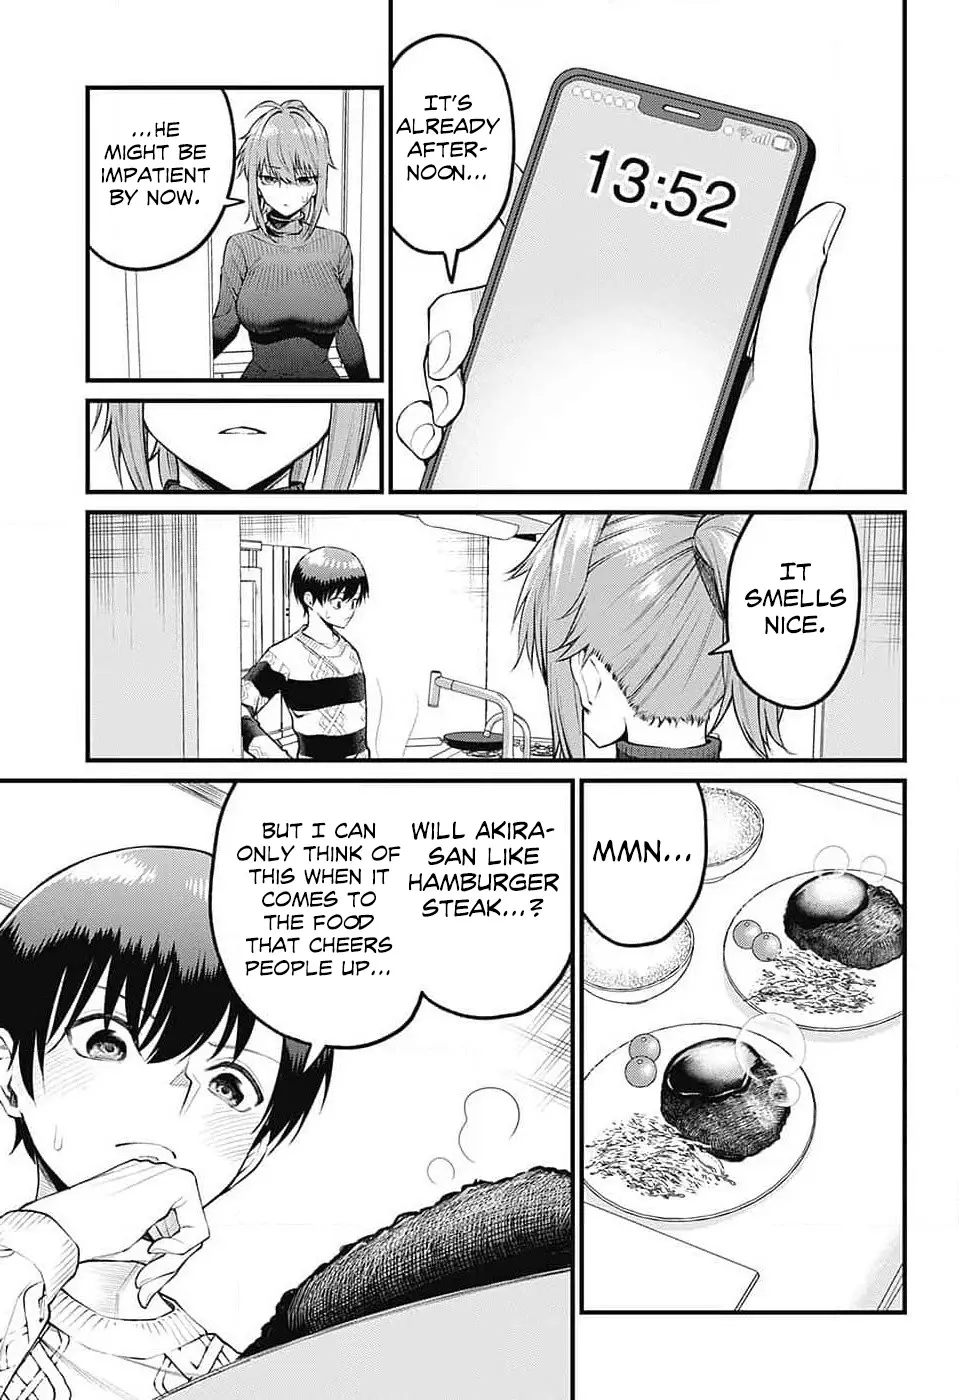 Akanabe-Sensei Doesn't Know About Embarrassment - 5 page 9-1923ae3b